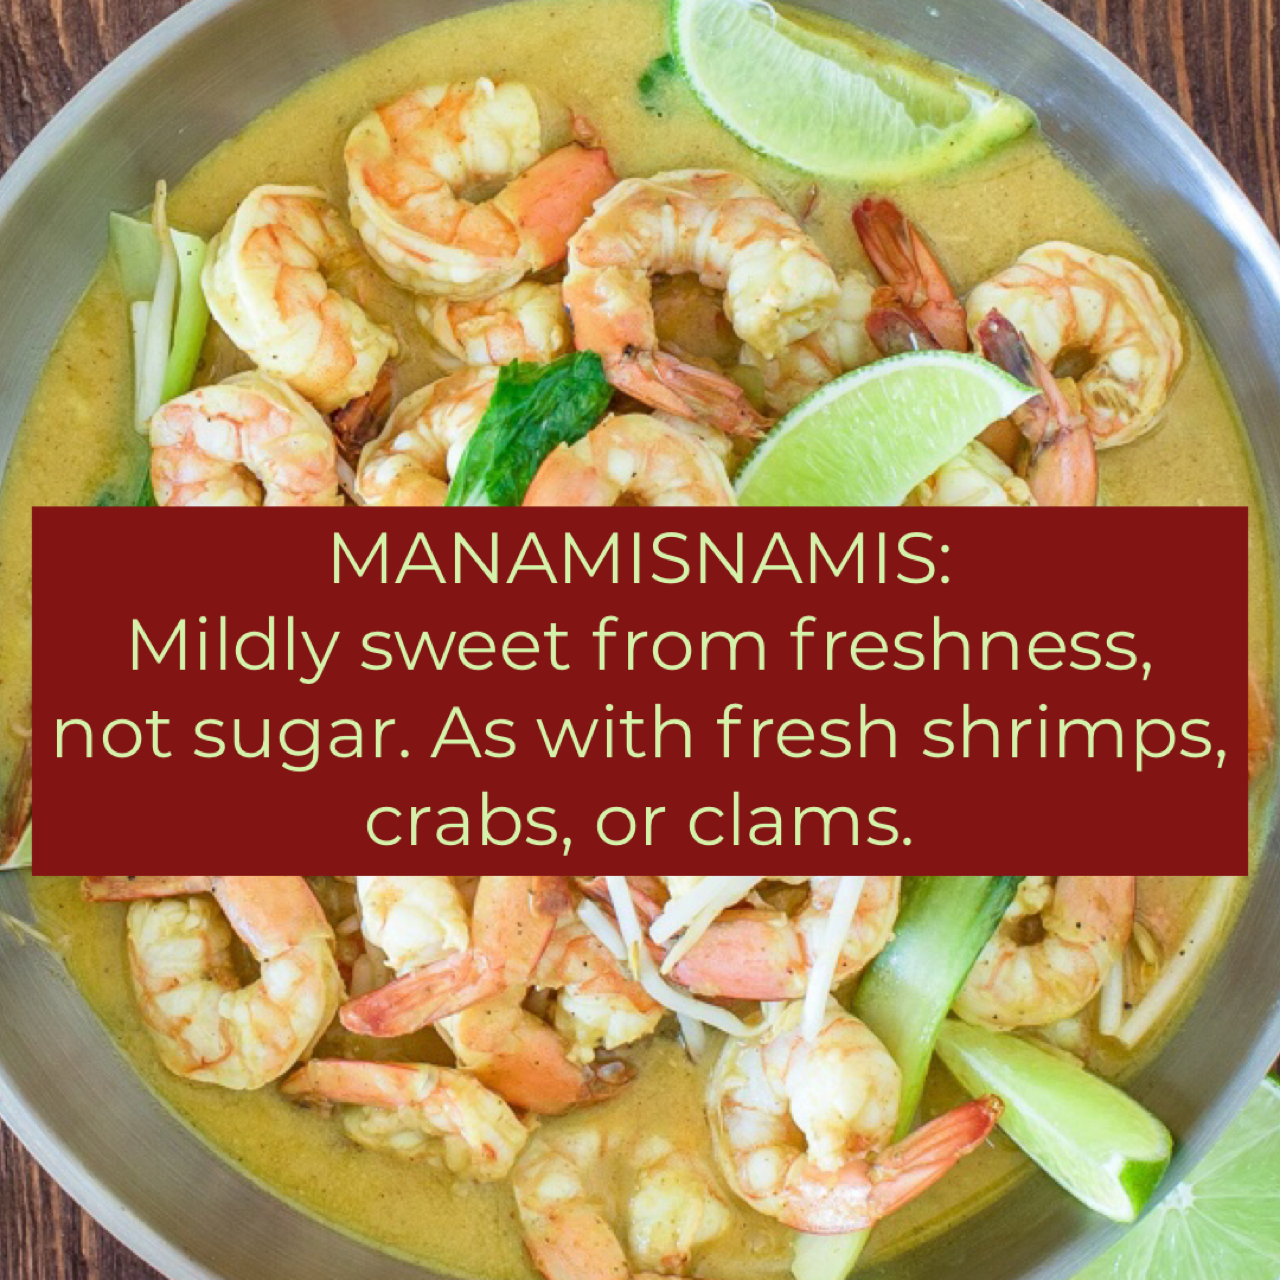 Manamisnamis: Mildy sweet from freshness, not from added sugar.